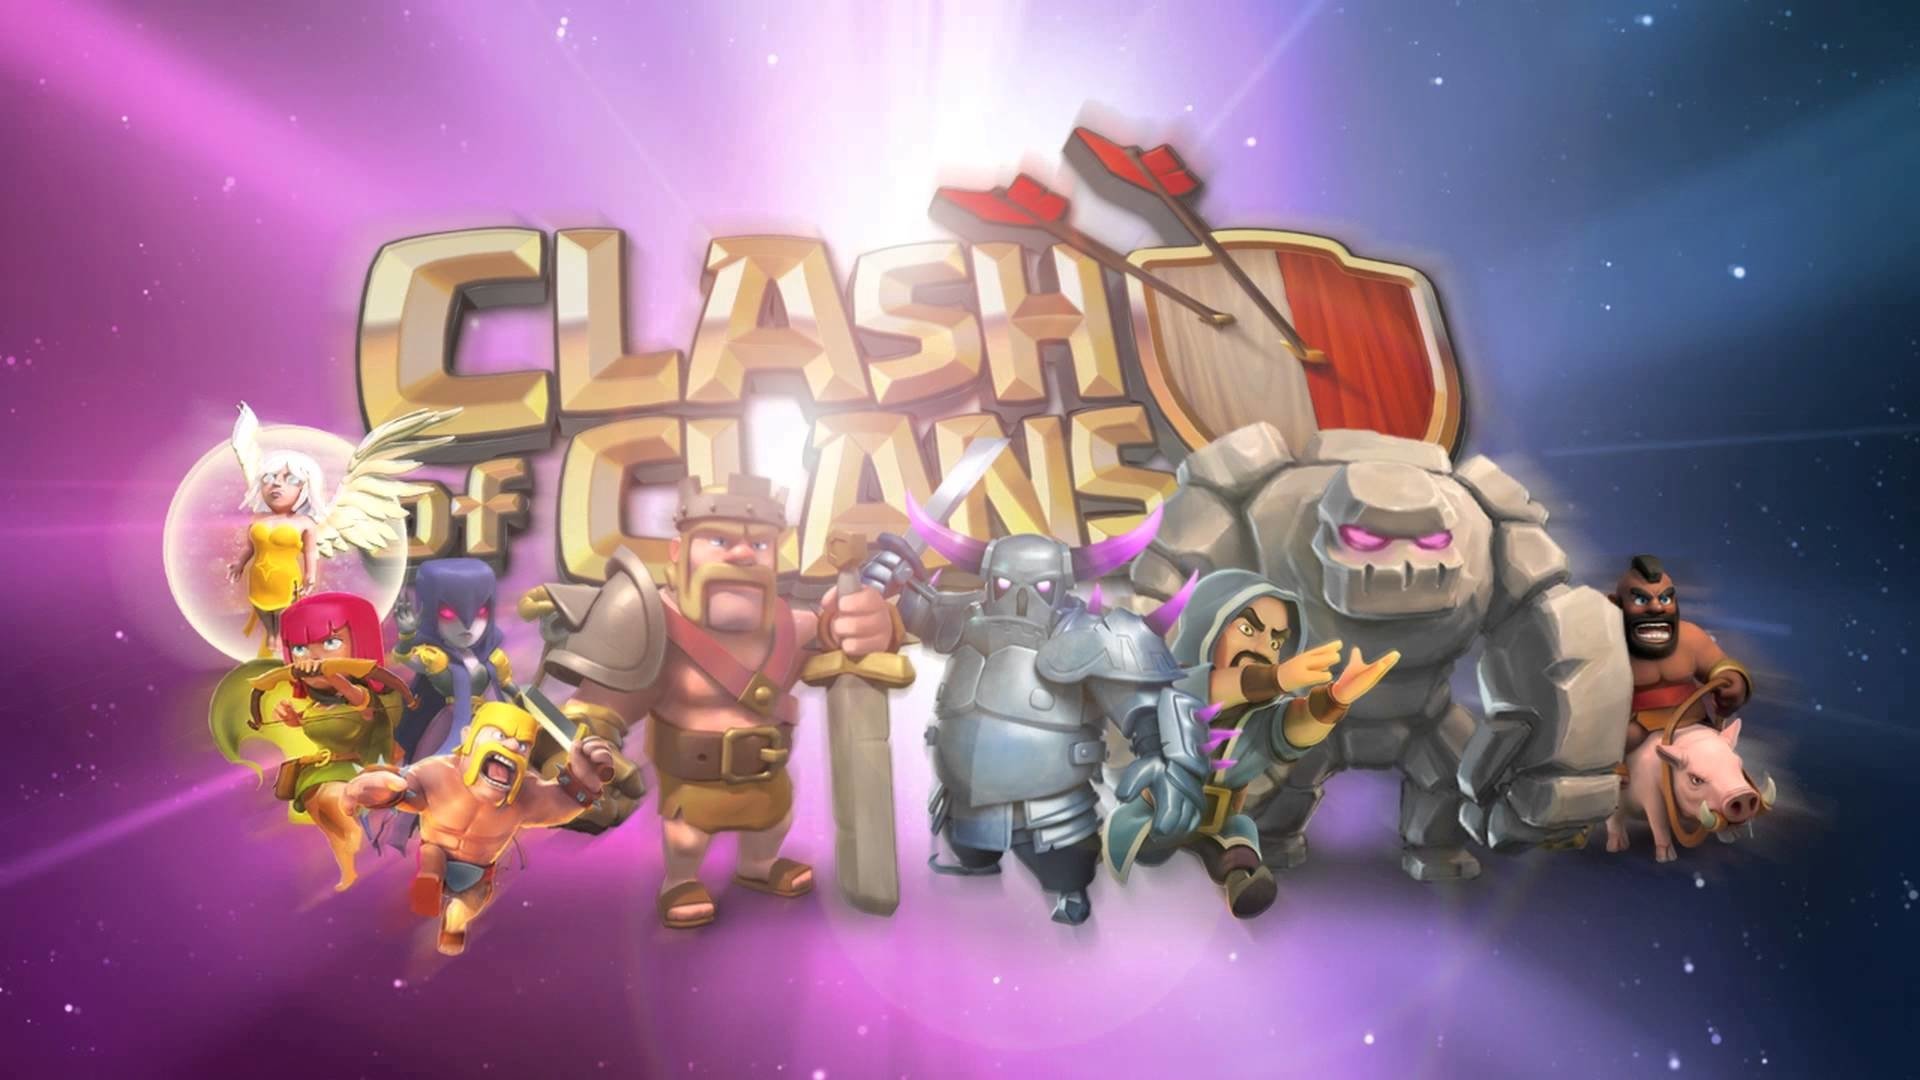 Cool Clash Of Clans Background , HD Wallpaper & Backgrounds